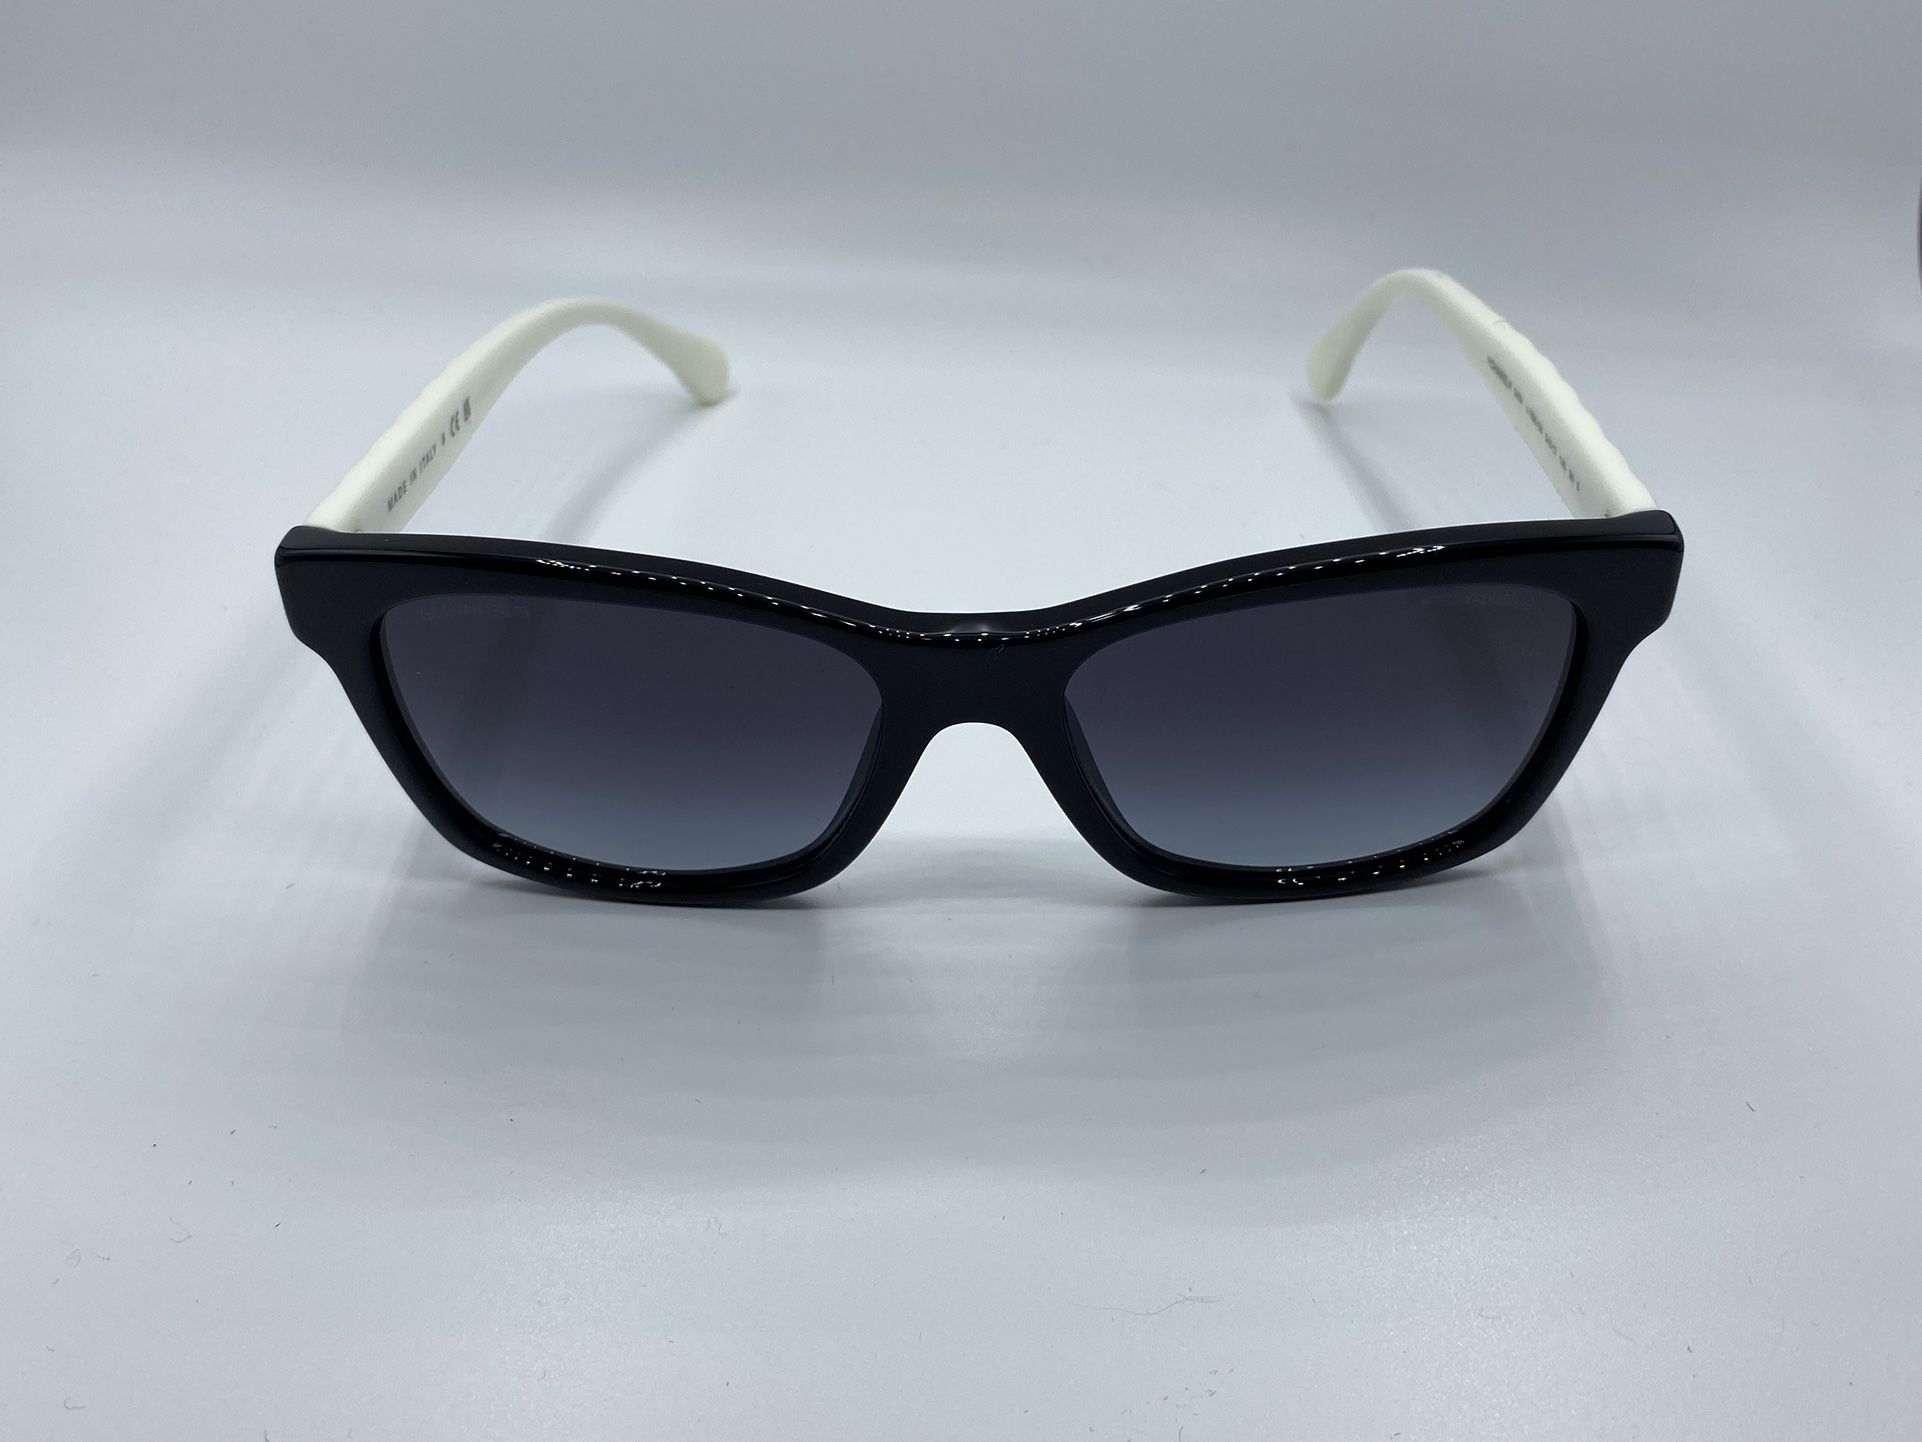 CHANEL CH5484 Sunglasses NEVER WORN Black And White 